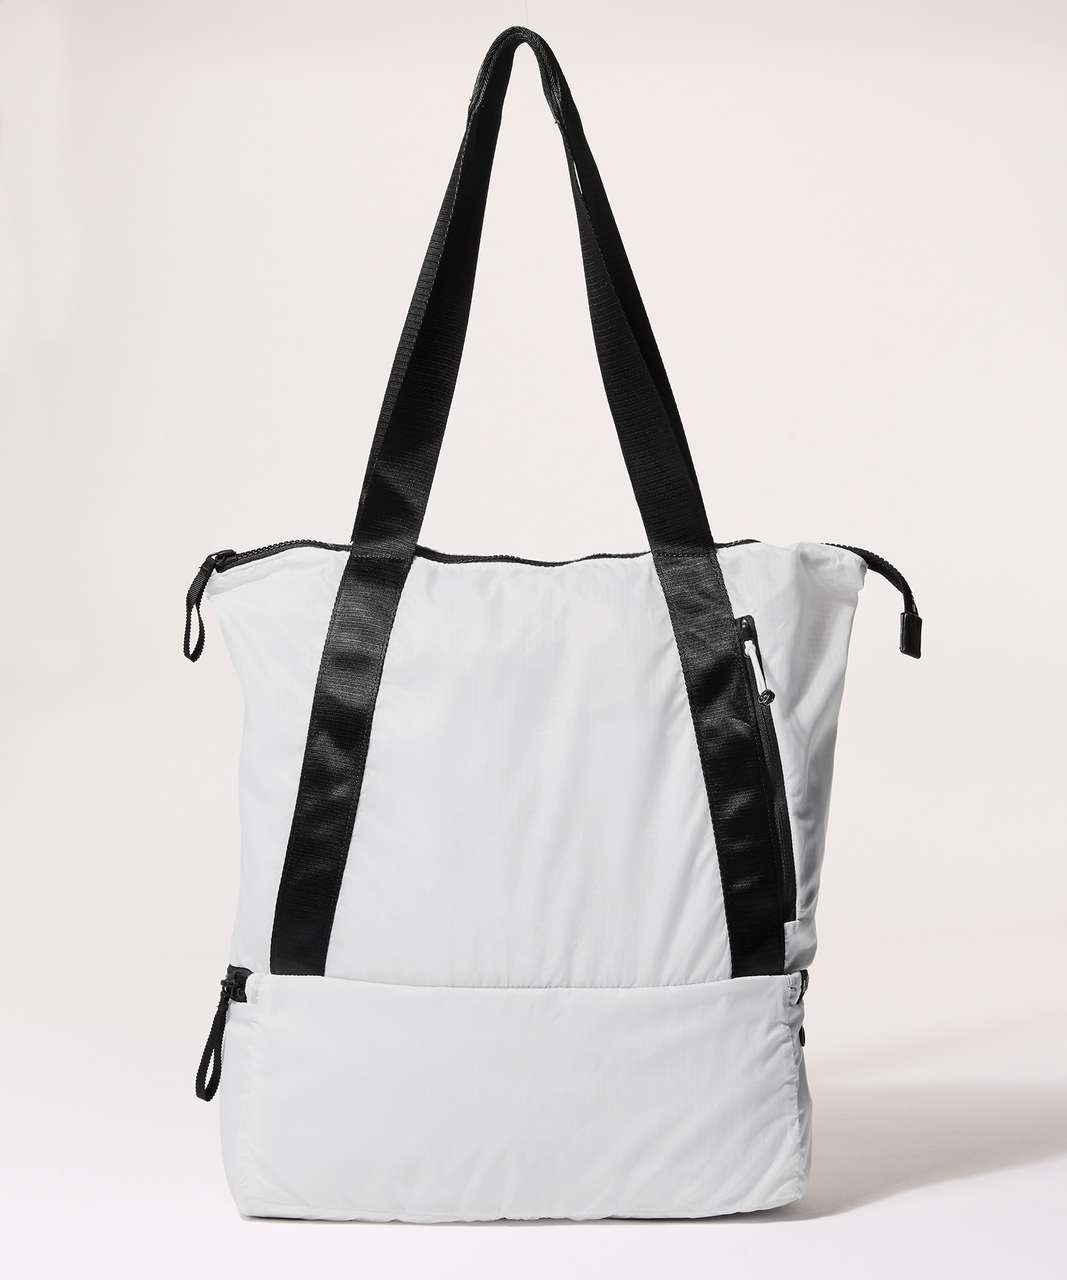 Lululemon Daily Multi-Pocket Canvas Tote Bag 20L - White/Natural/Medium Forest Cotton Fabric